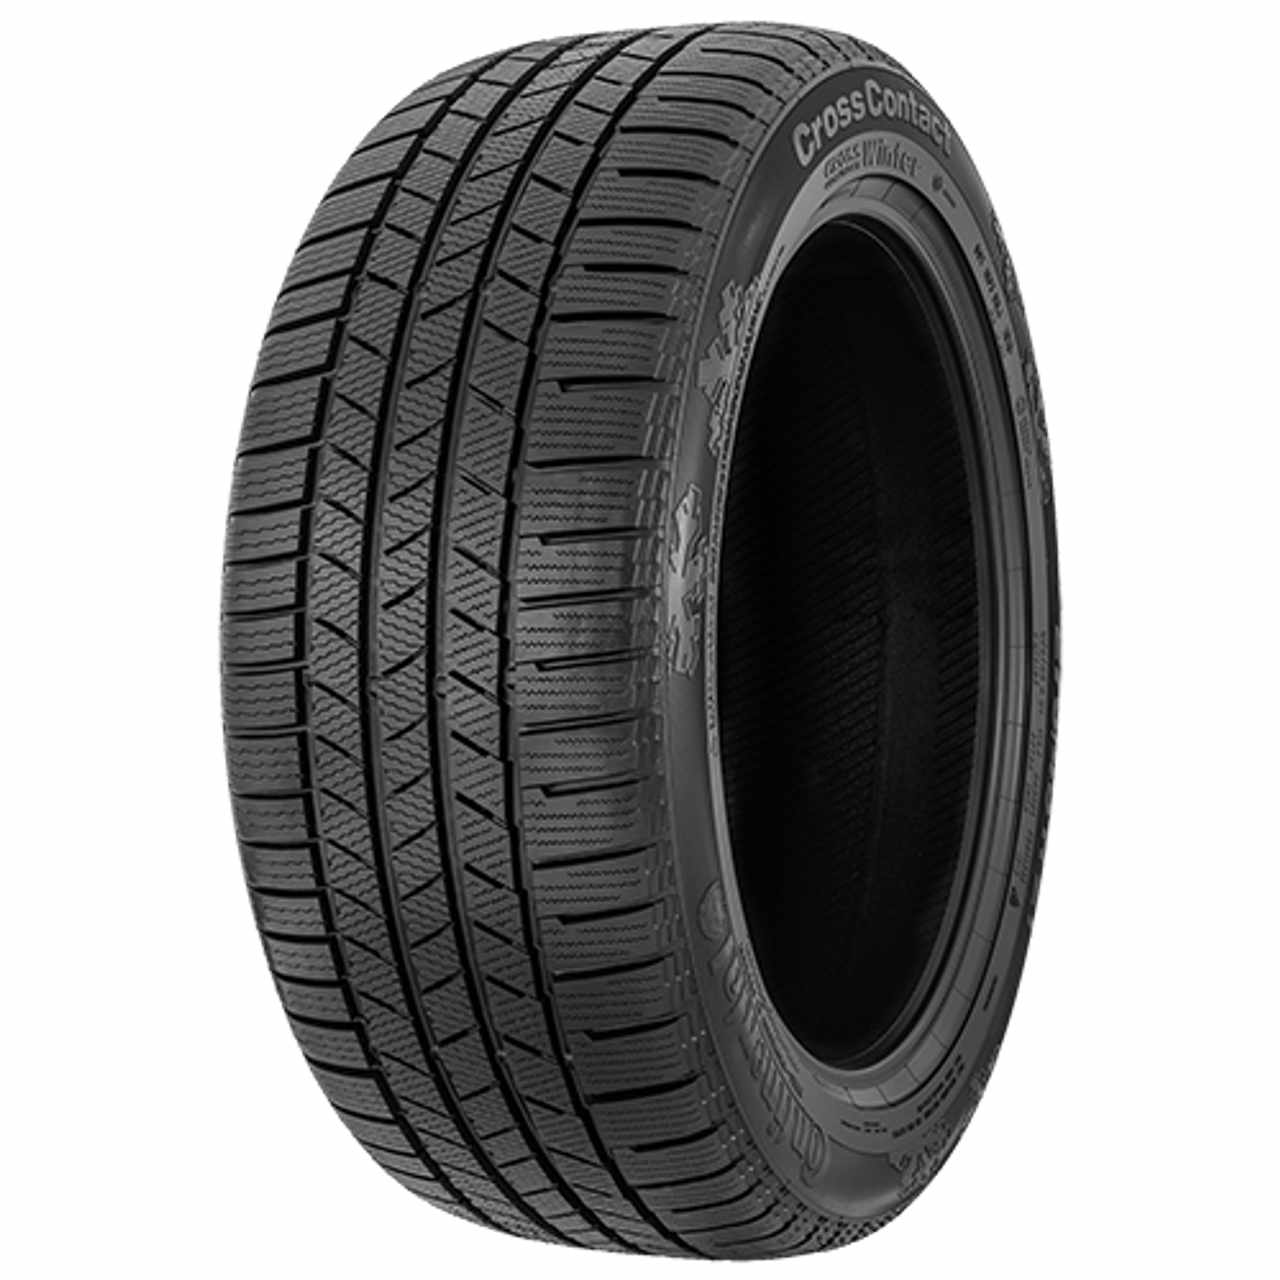 CONTINENTAL CONTICROSSCONTACT WINTER 235/70R16 106T